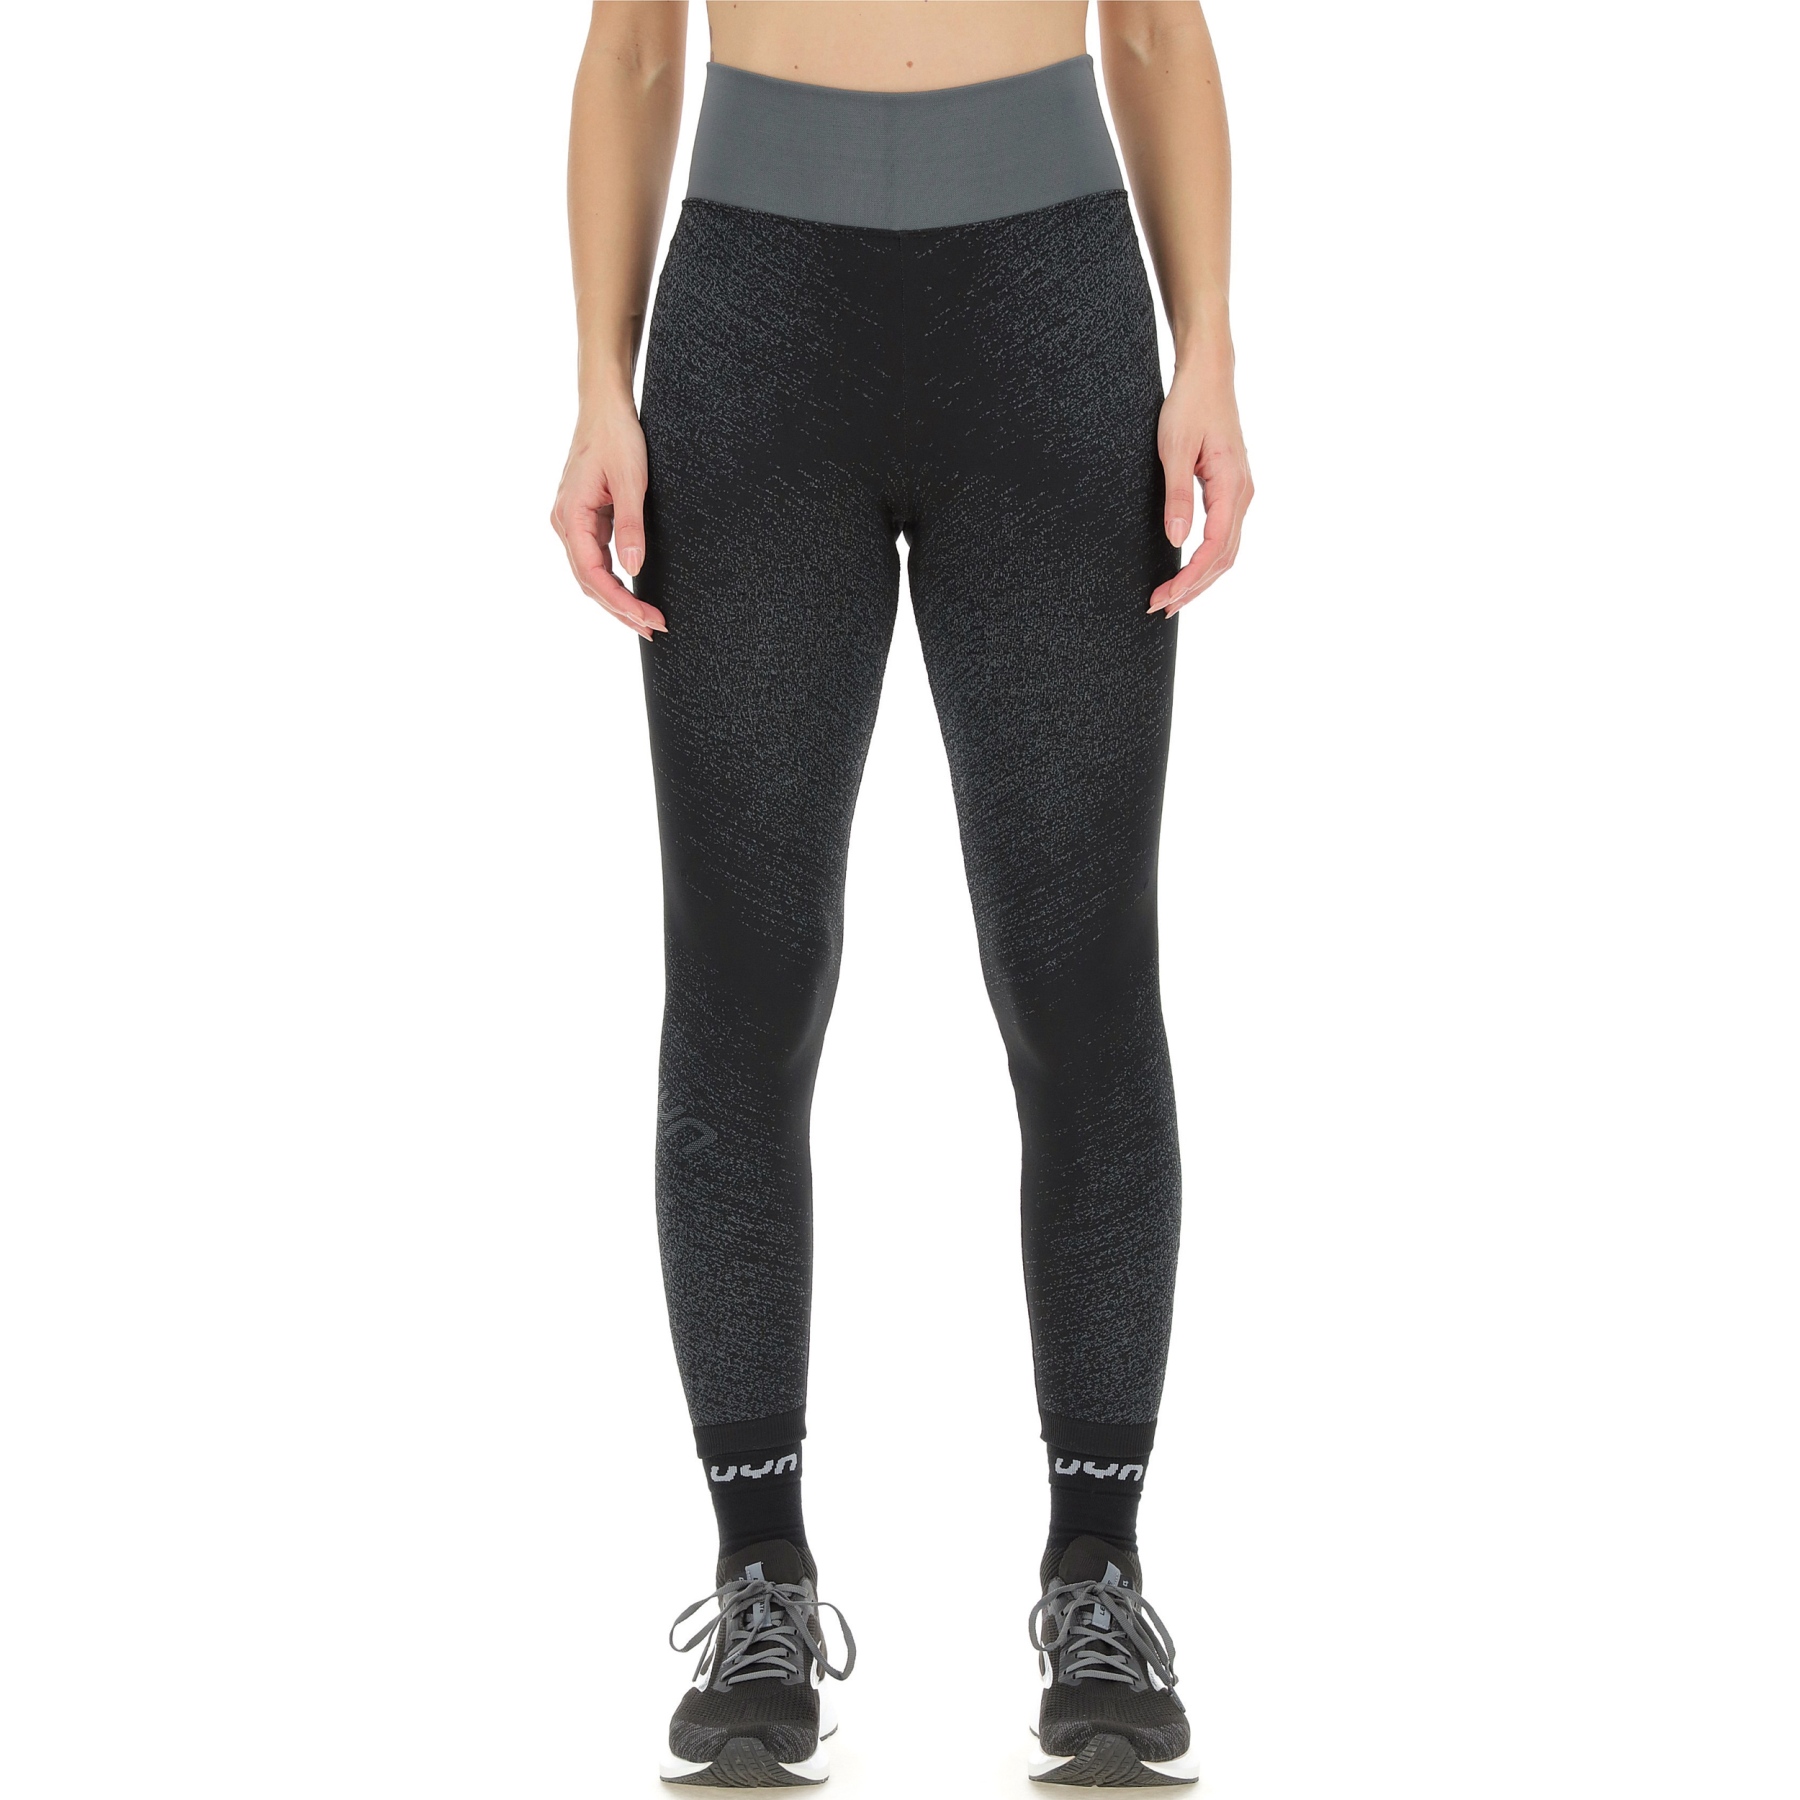 Picture of UYN Running Exceleration Pants Women - Black/Cloud